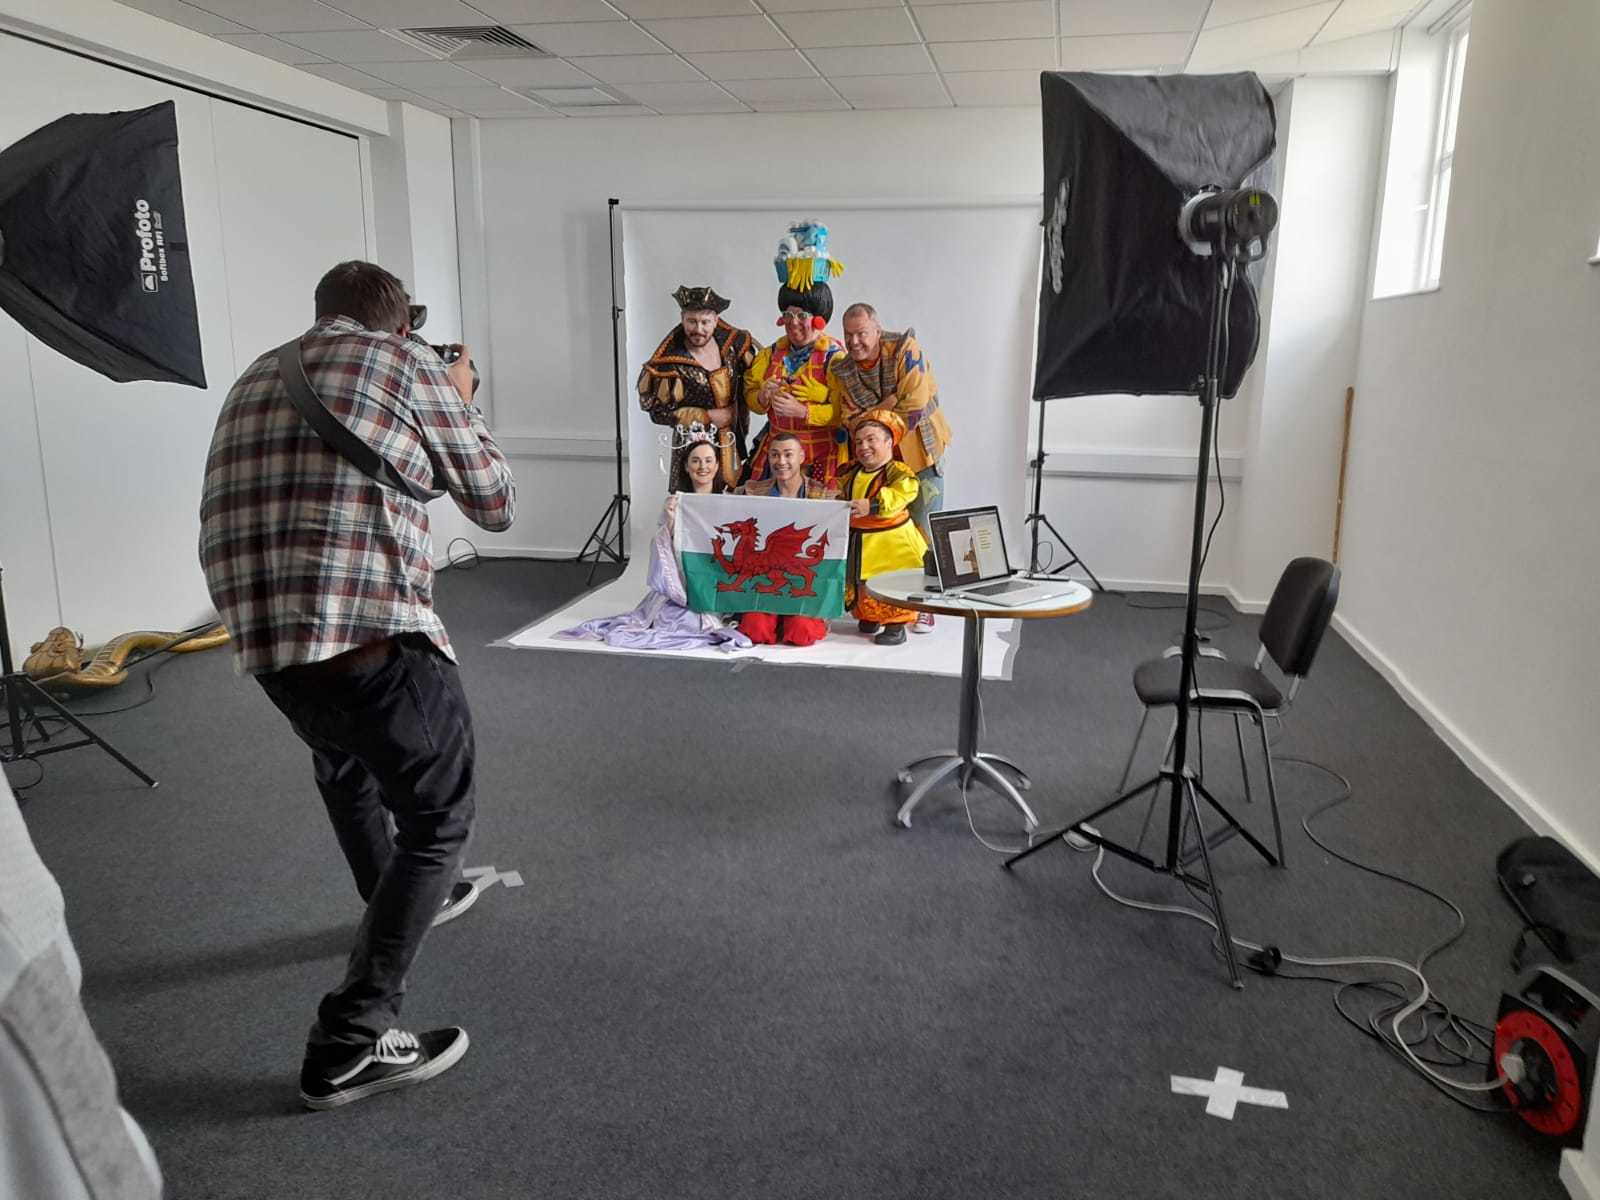 A photoshoot was conducted on the panto launch day at Venue Cymru. Picture: Suzanne Kendrick